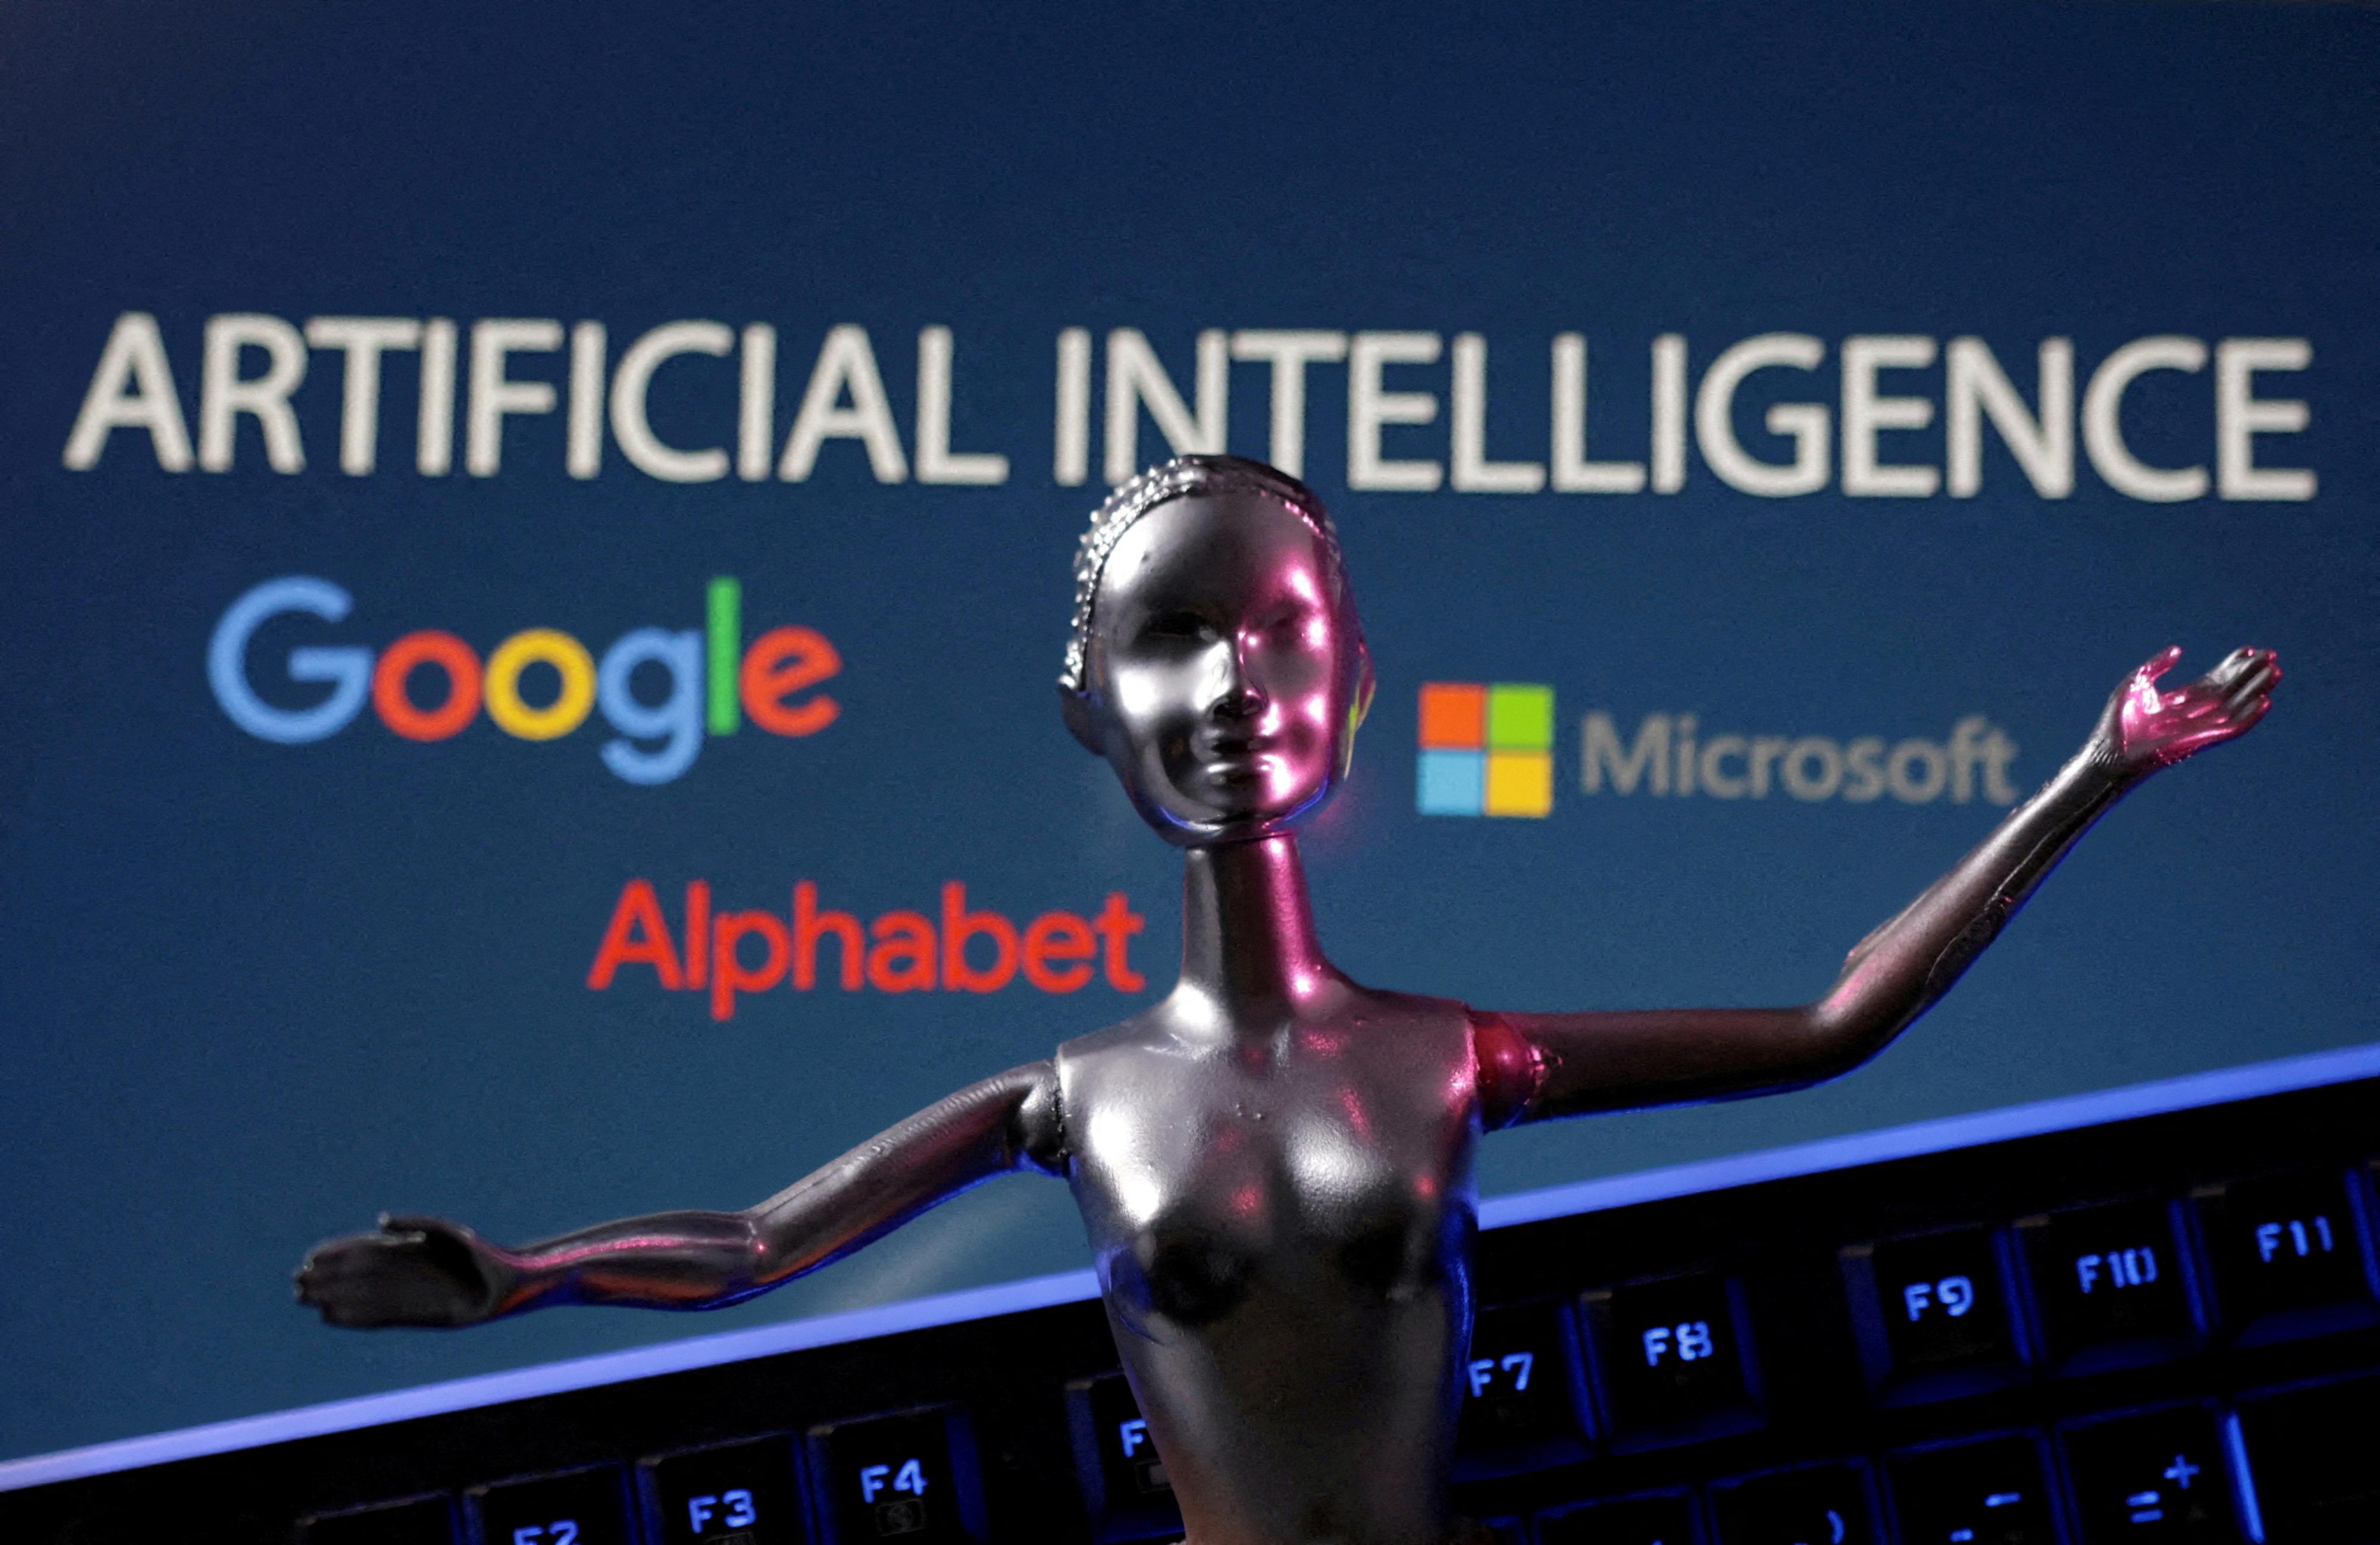 Illustration shows Google, Microsoft and Alphabet logos and AI Artificial Intelligence words